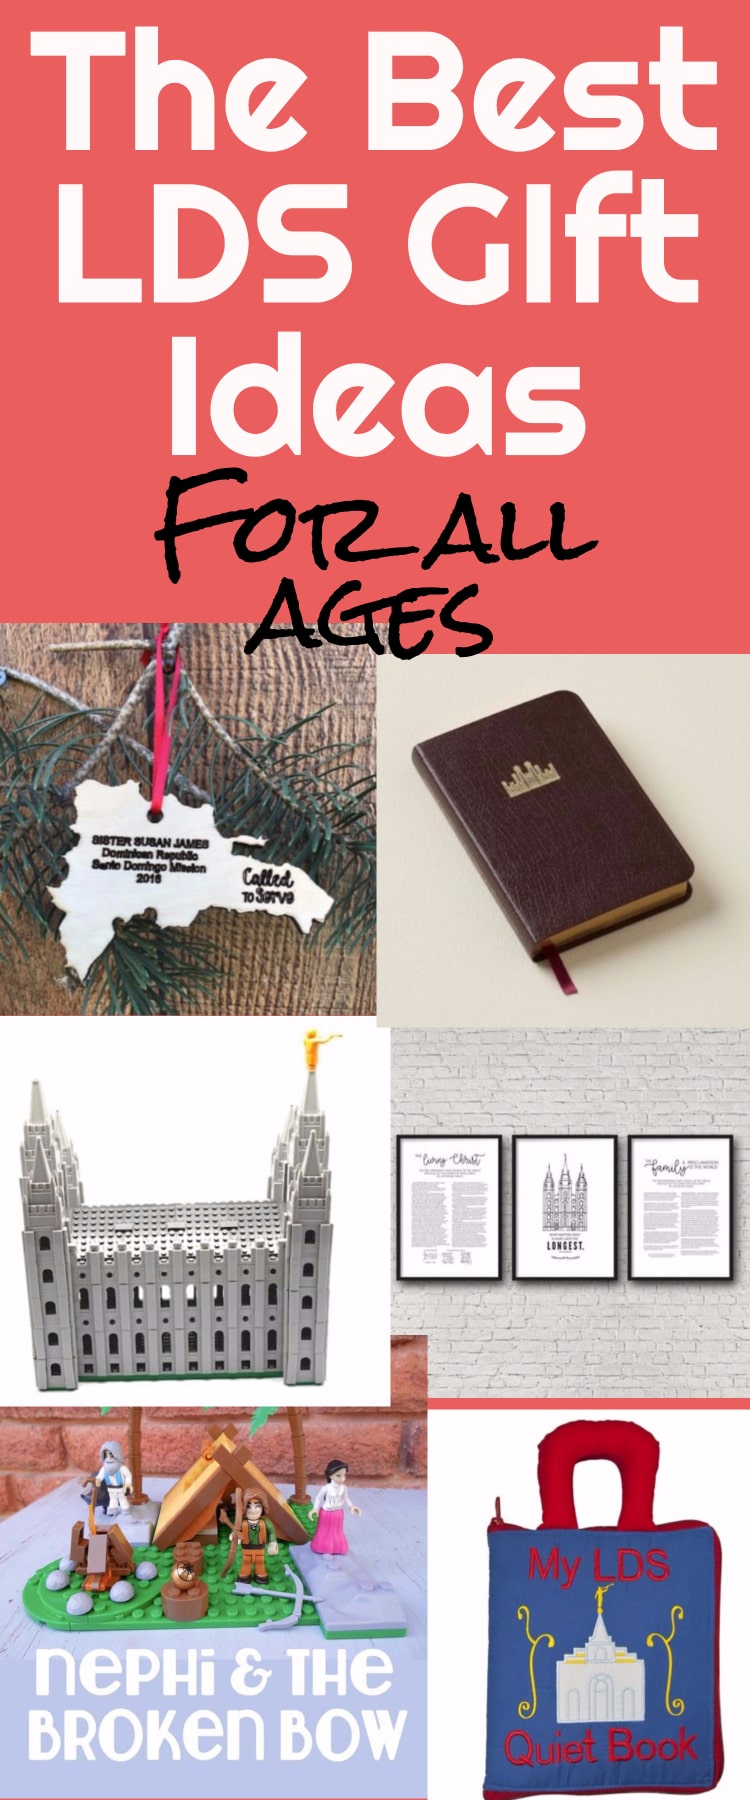 The 2019 Best LDS Gift Ideas - for